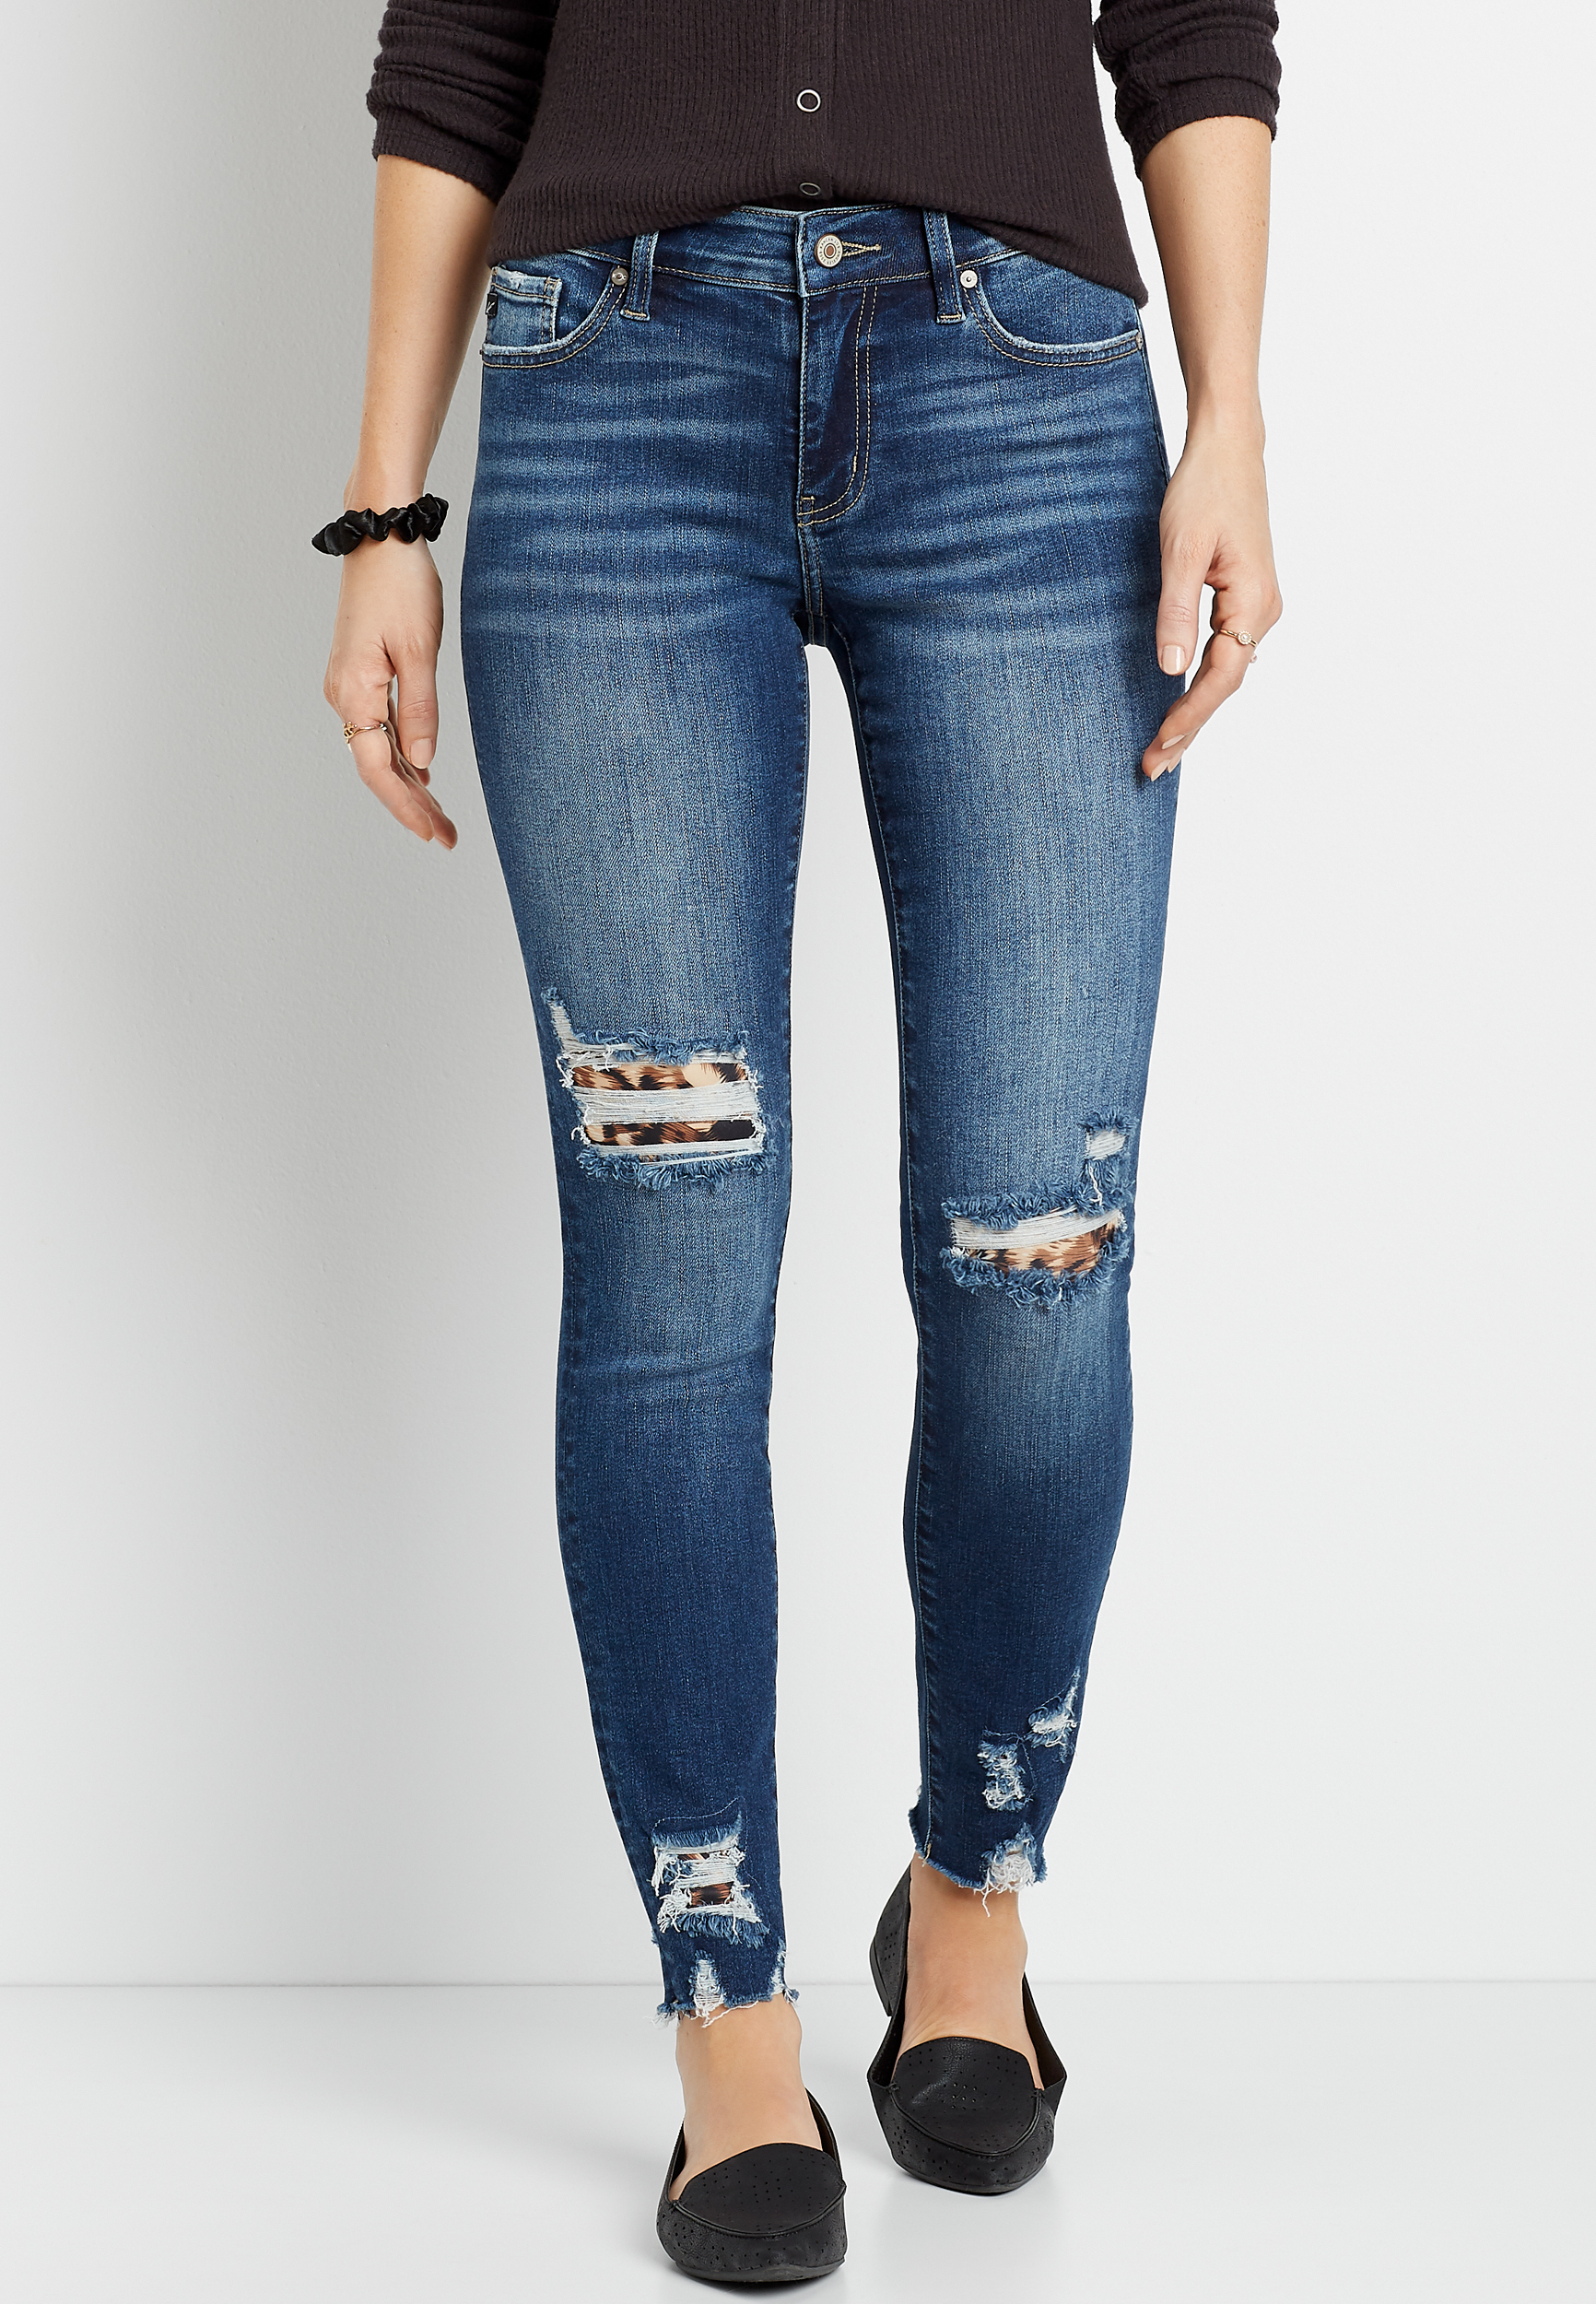 KanCan™ Skinny Mid Rise Leopard Backed Ripped Jean | maurices